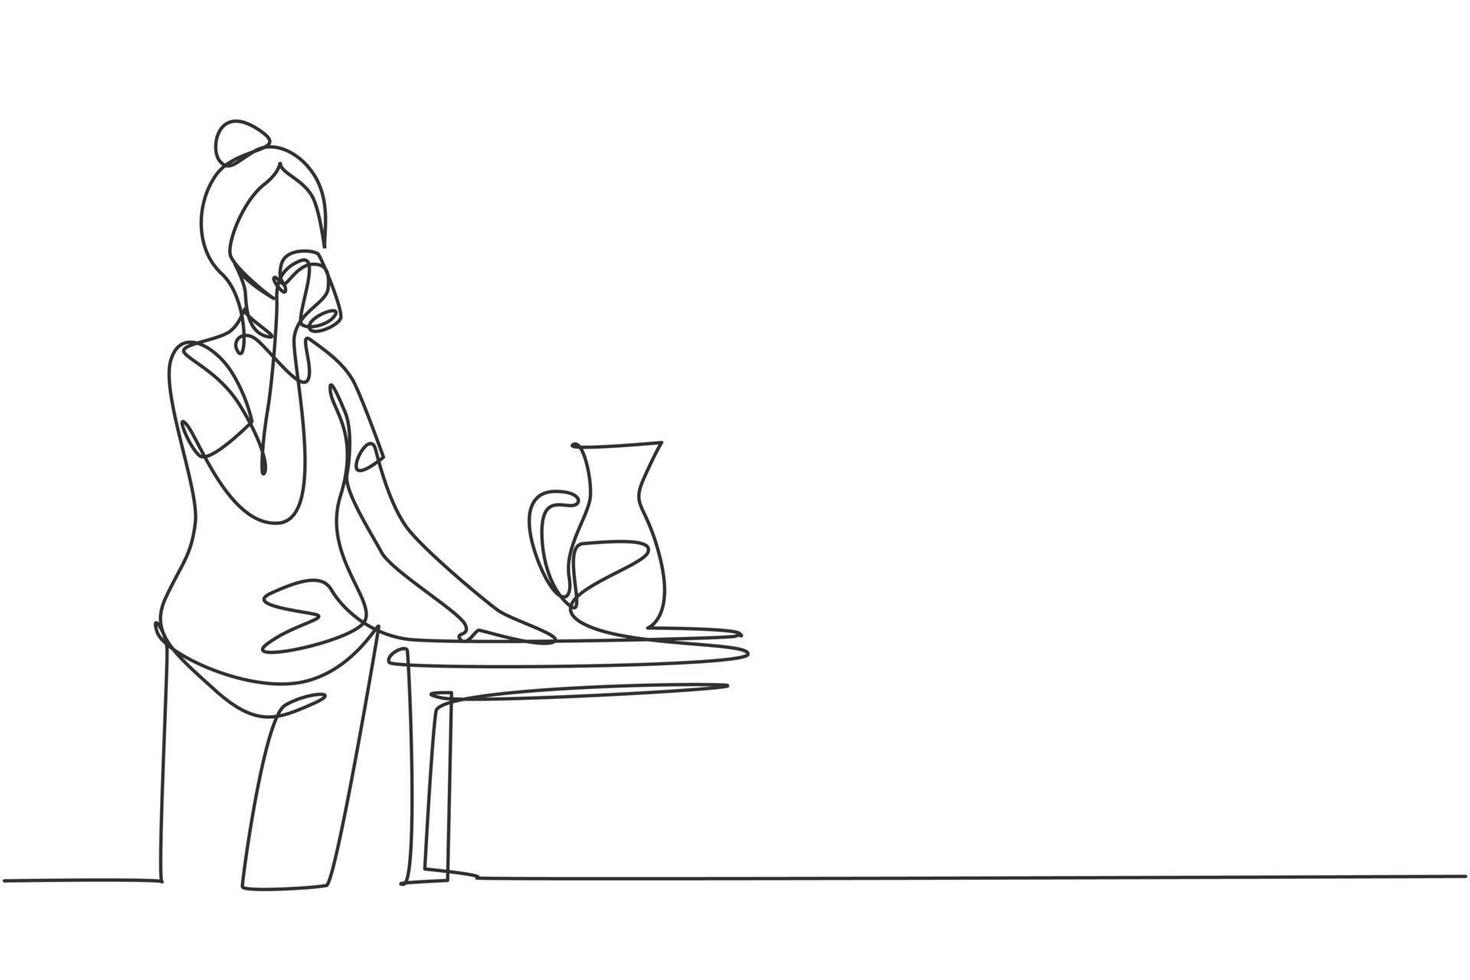 Single one line drawing young woman standing and drinking water in a glass from a jug. Take a break while cleaning house. Happy person. Modern continuous line draw design graphic vector illustration